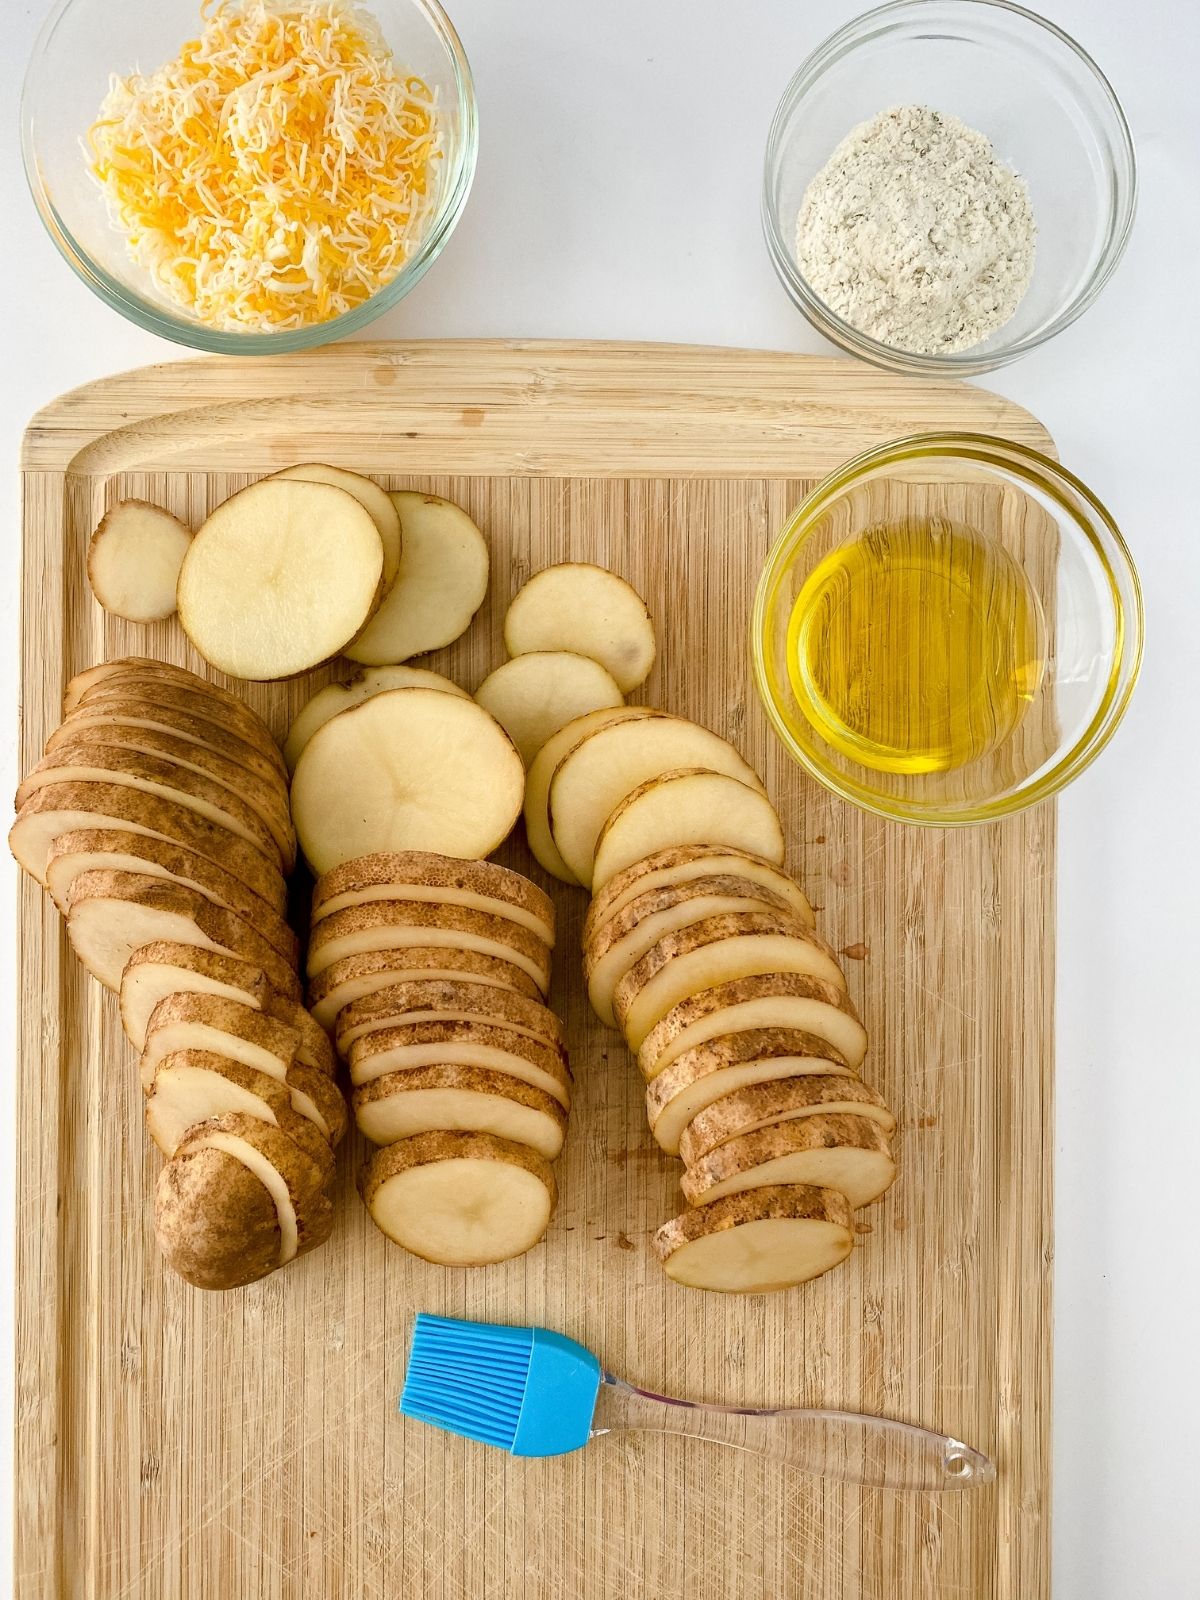 Sliced potatoes on cutting board with cheese, and seasoning mix.